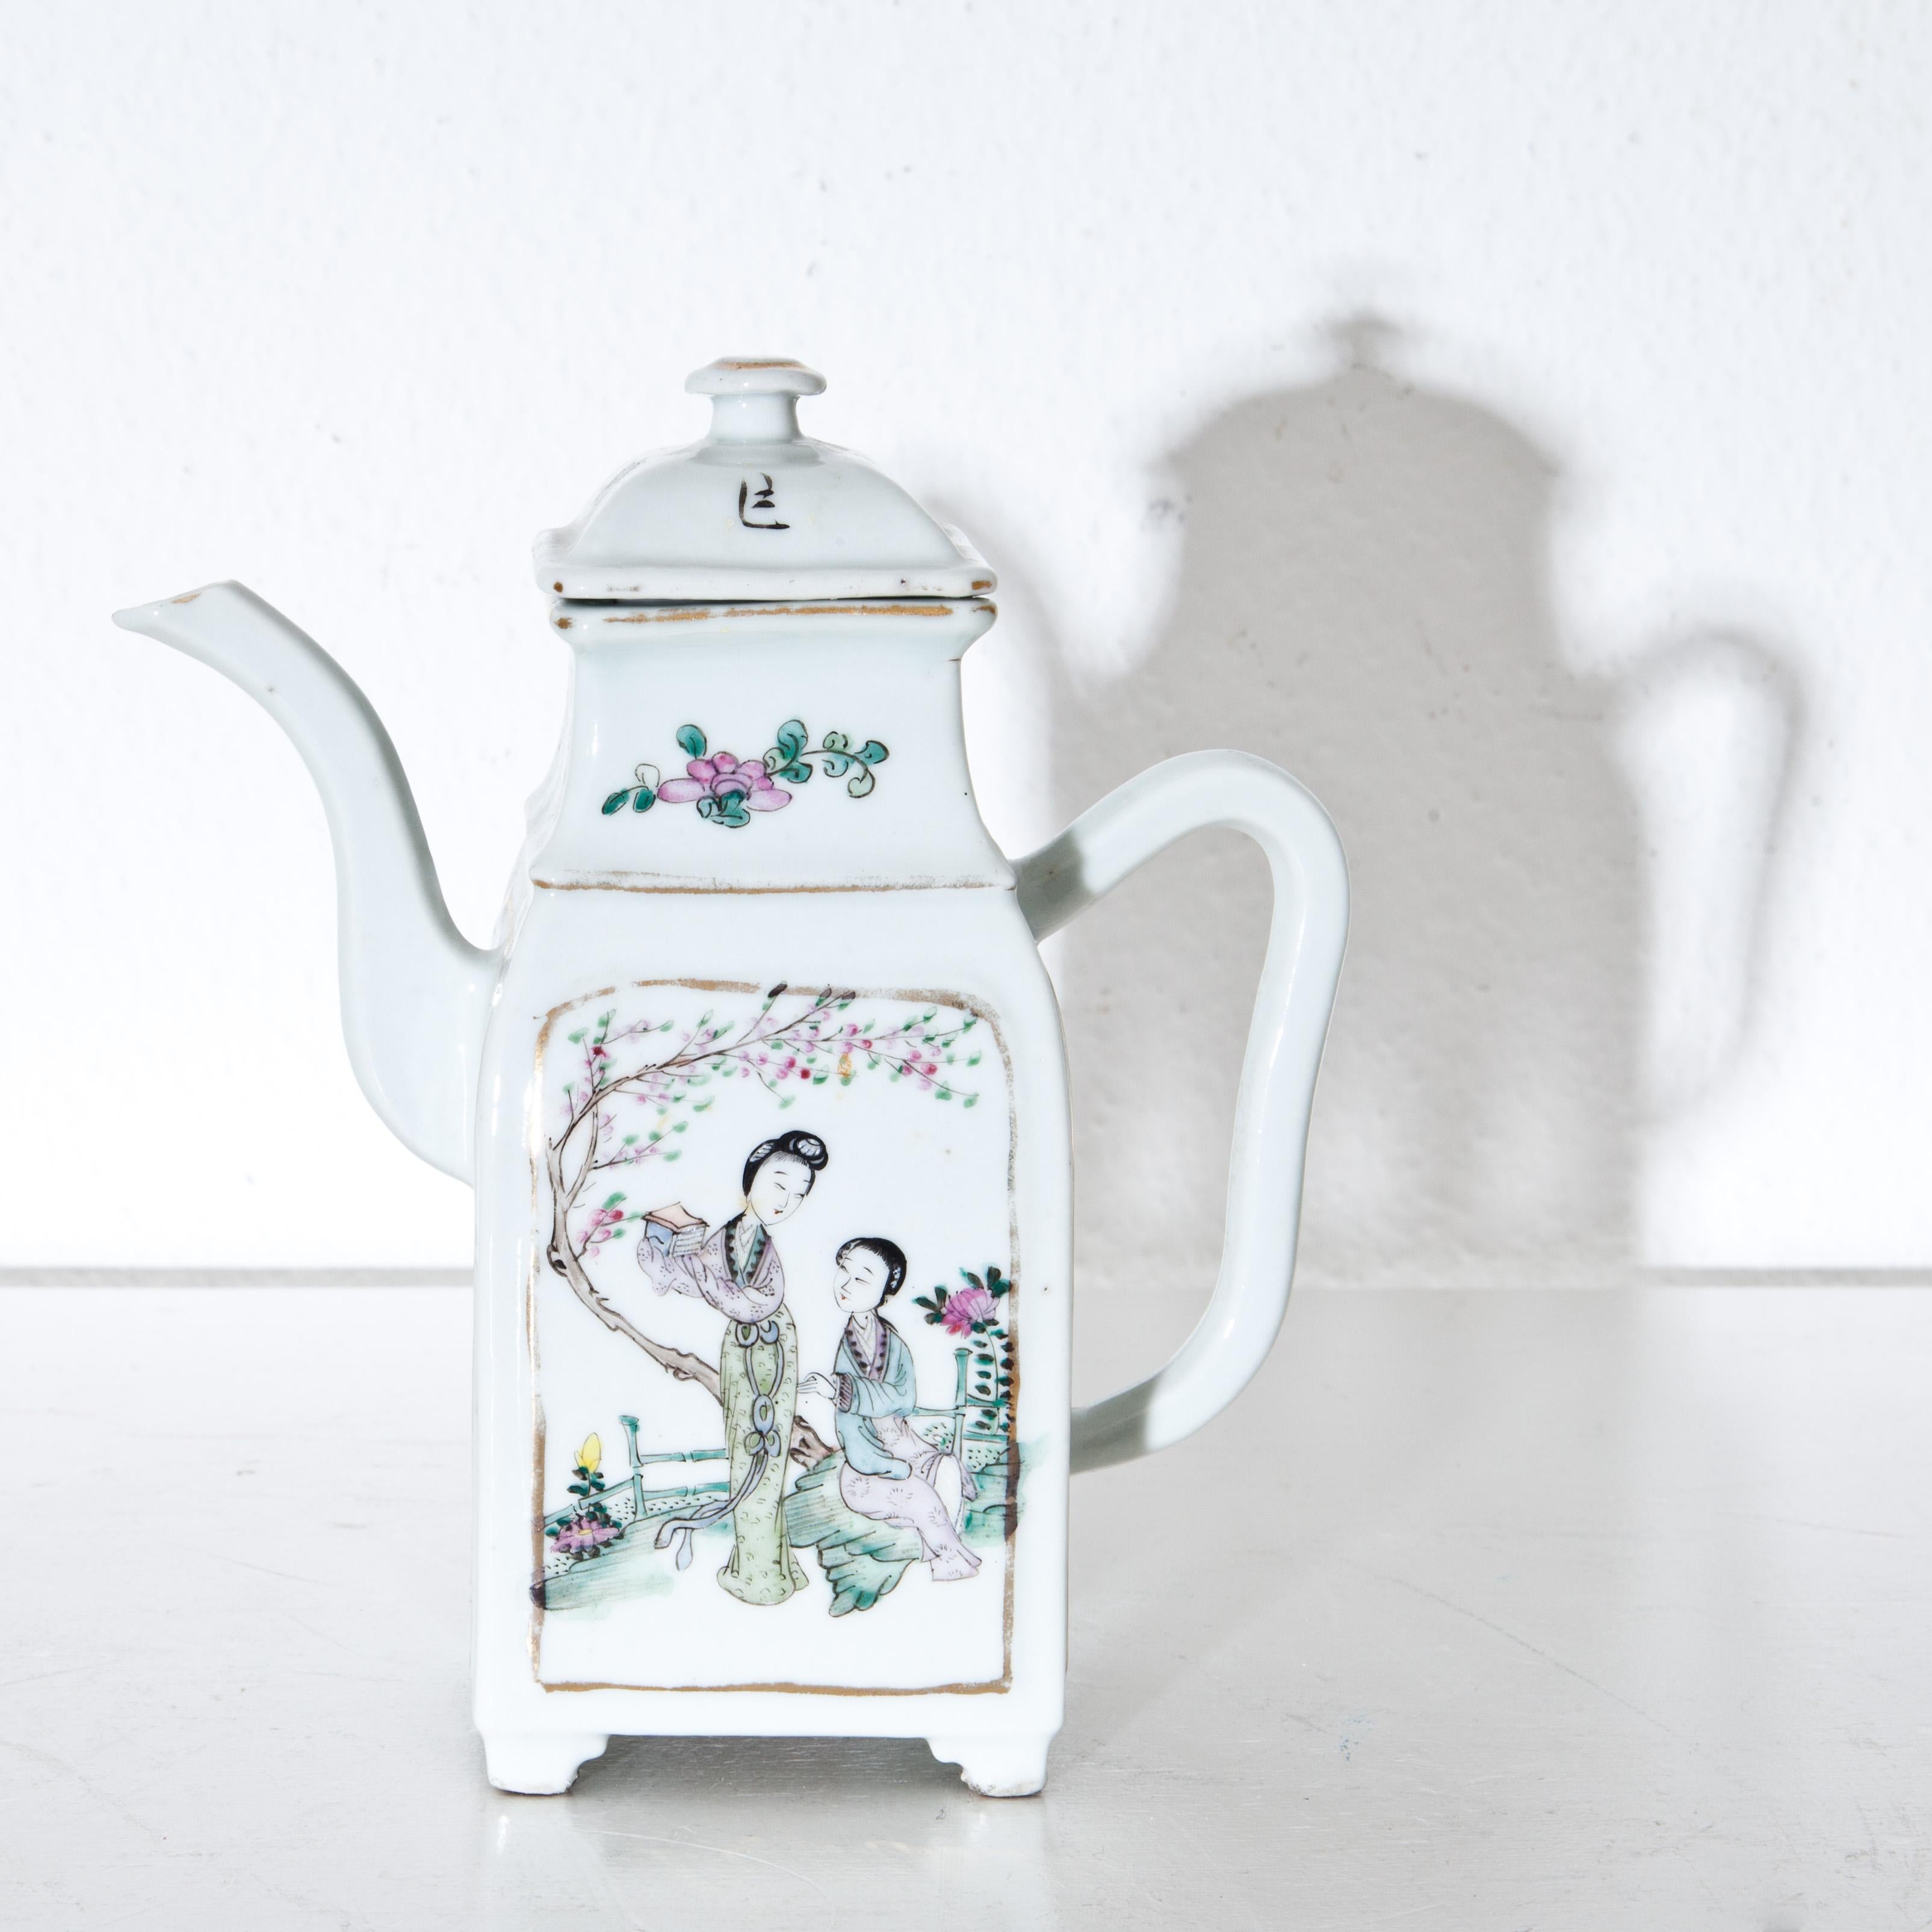 Small porcelain teapot with polychrome figurative scenes on the sides.